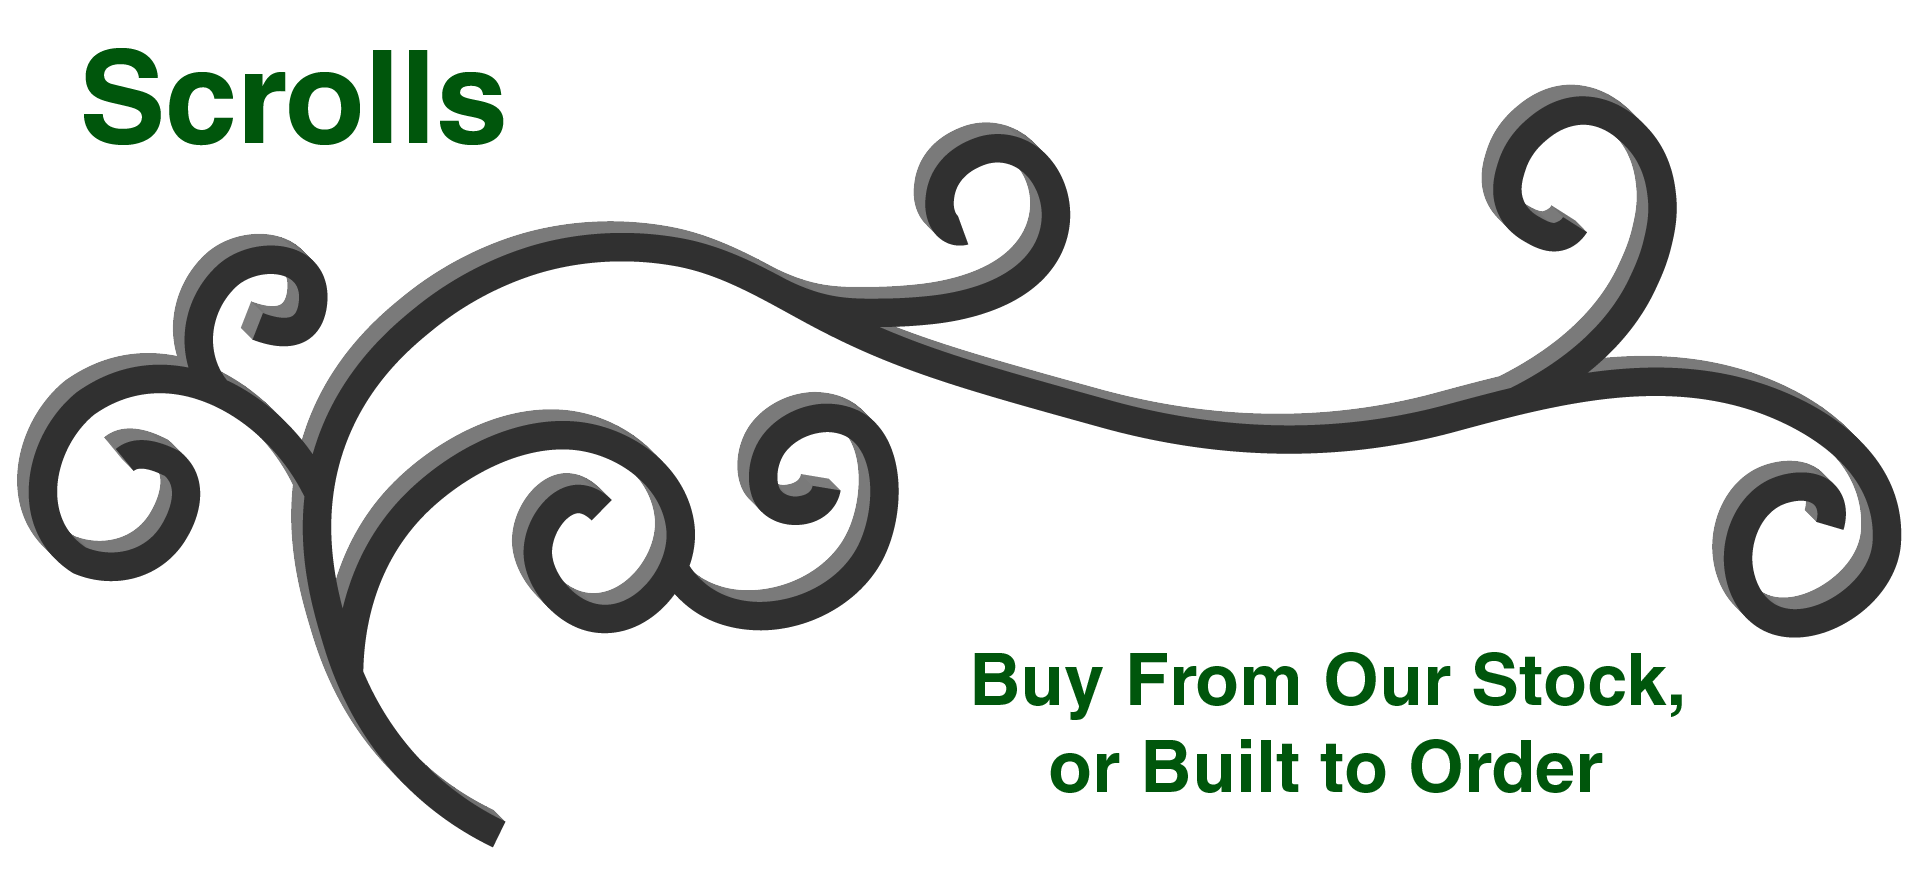 Wrought Iron Scrolls, Forged Steel Scrolls, Forged Steel Scroll Panels. Wide variety and Excellent Quality from Superior Ornamental Supply.